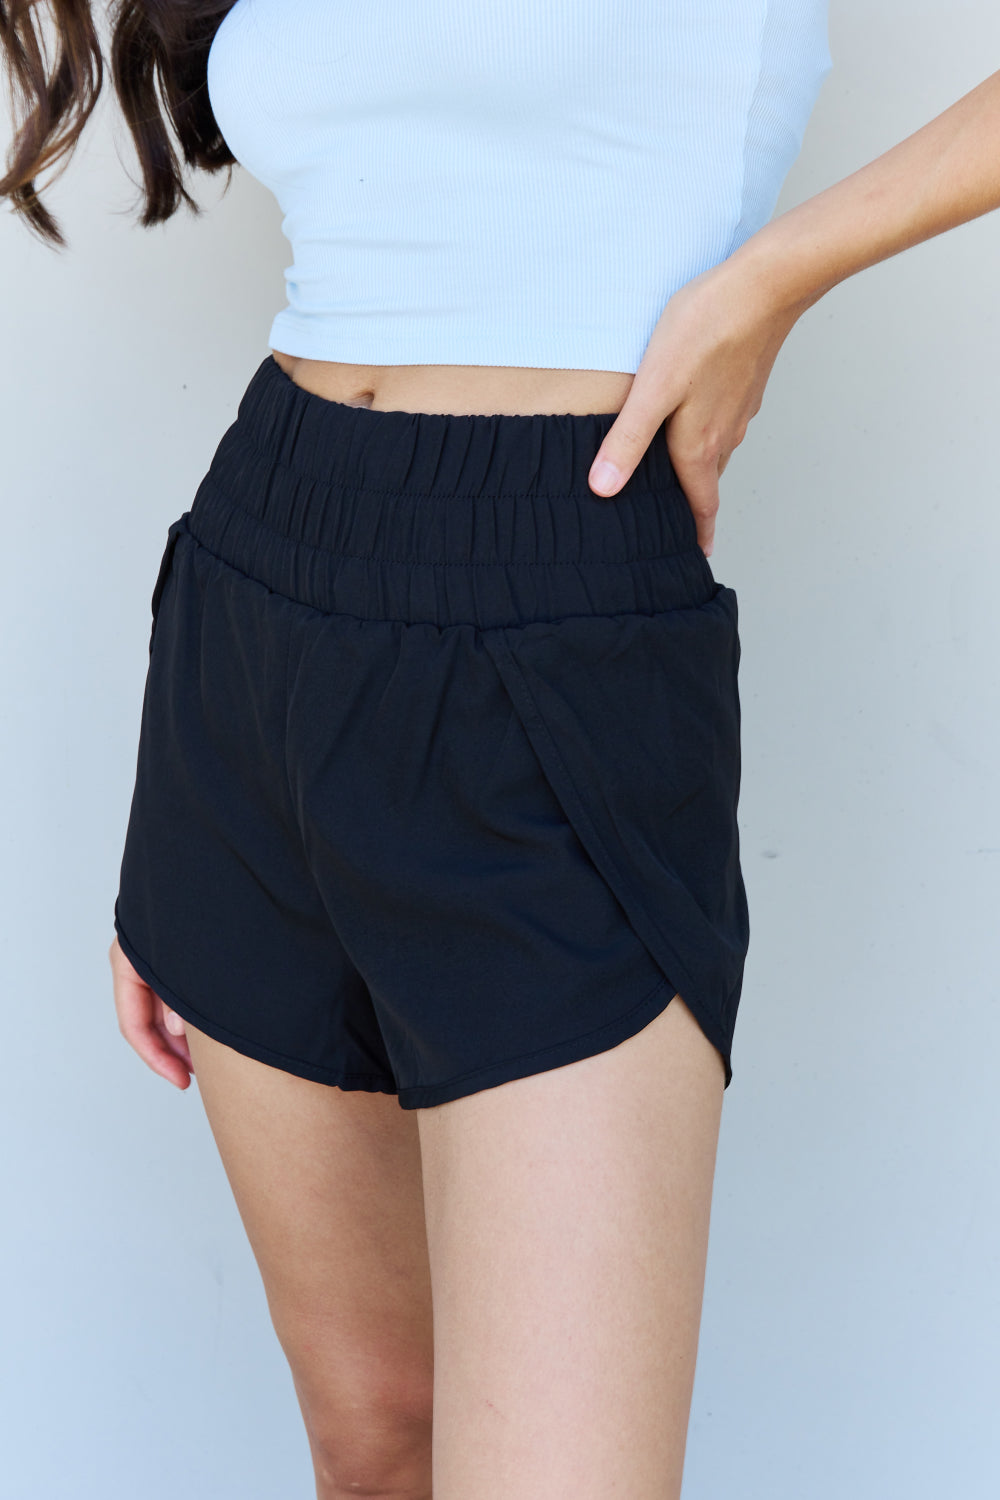 Stay Active High Waist Active Shorts | Black